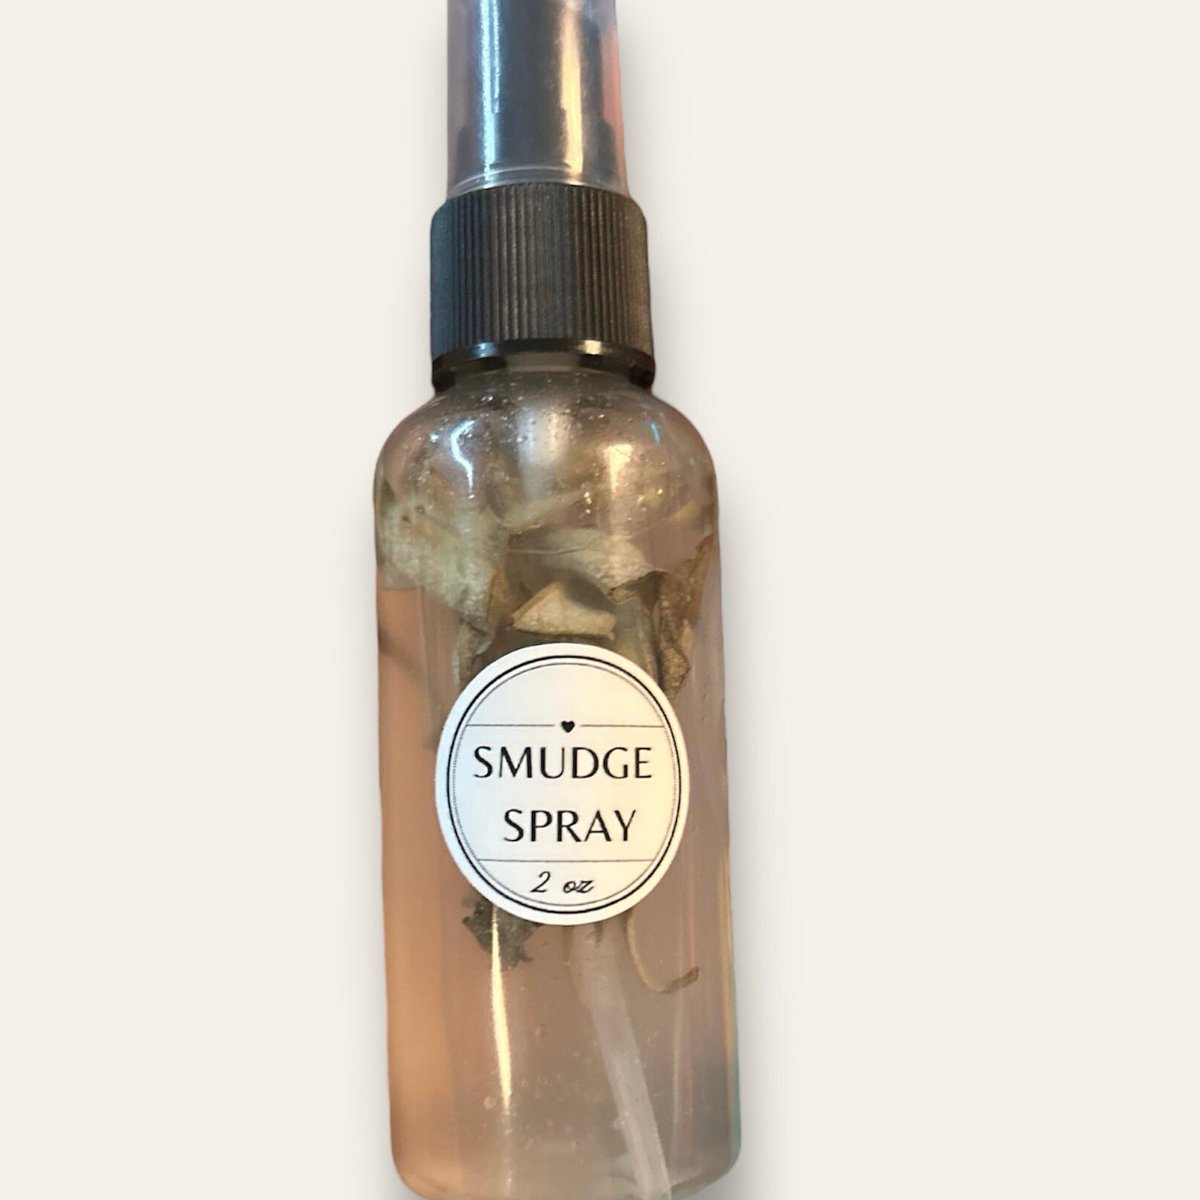 Smudge Spray available in our shop enchantedalley3.etsy.com/listing/157055… #sagespray #smudge #purify #protection #witchyfinds #etsyshop #etsywitchshop #handmade